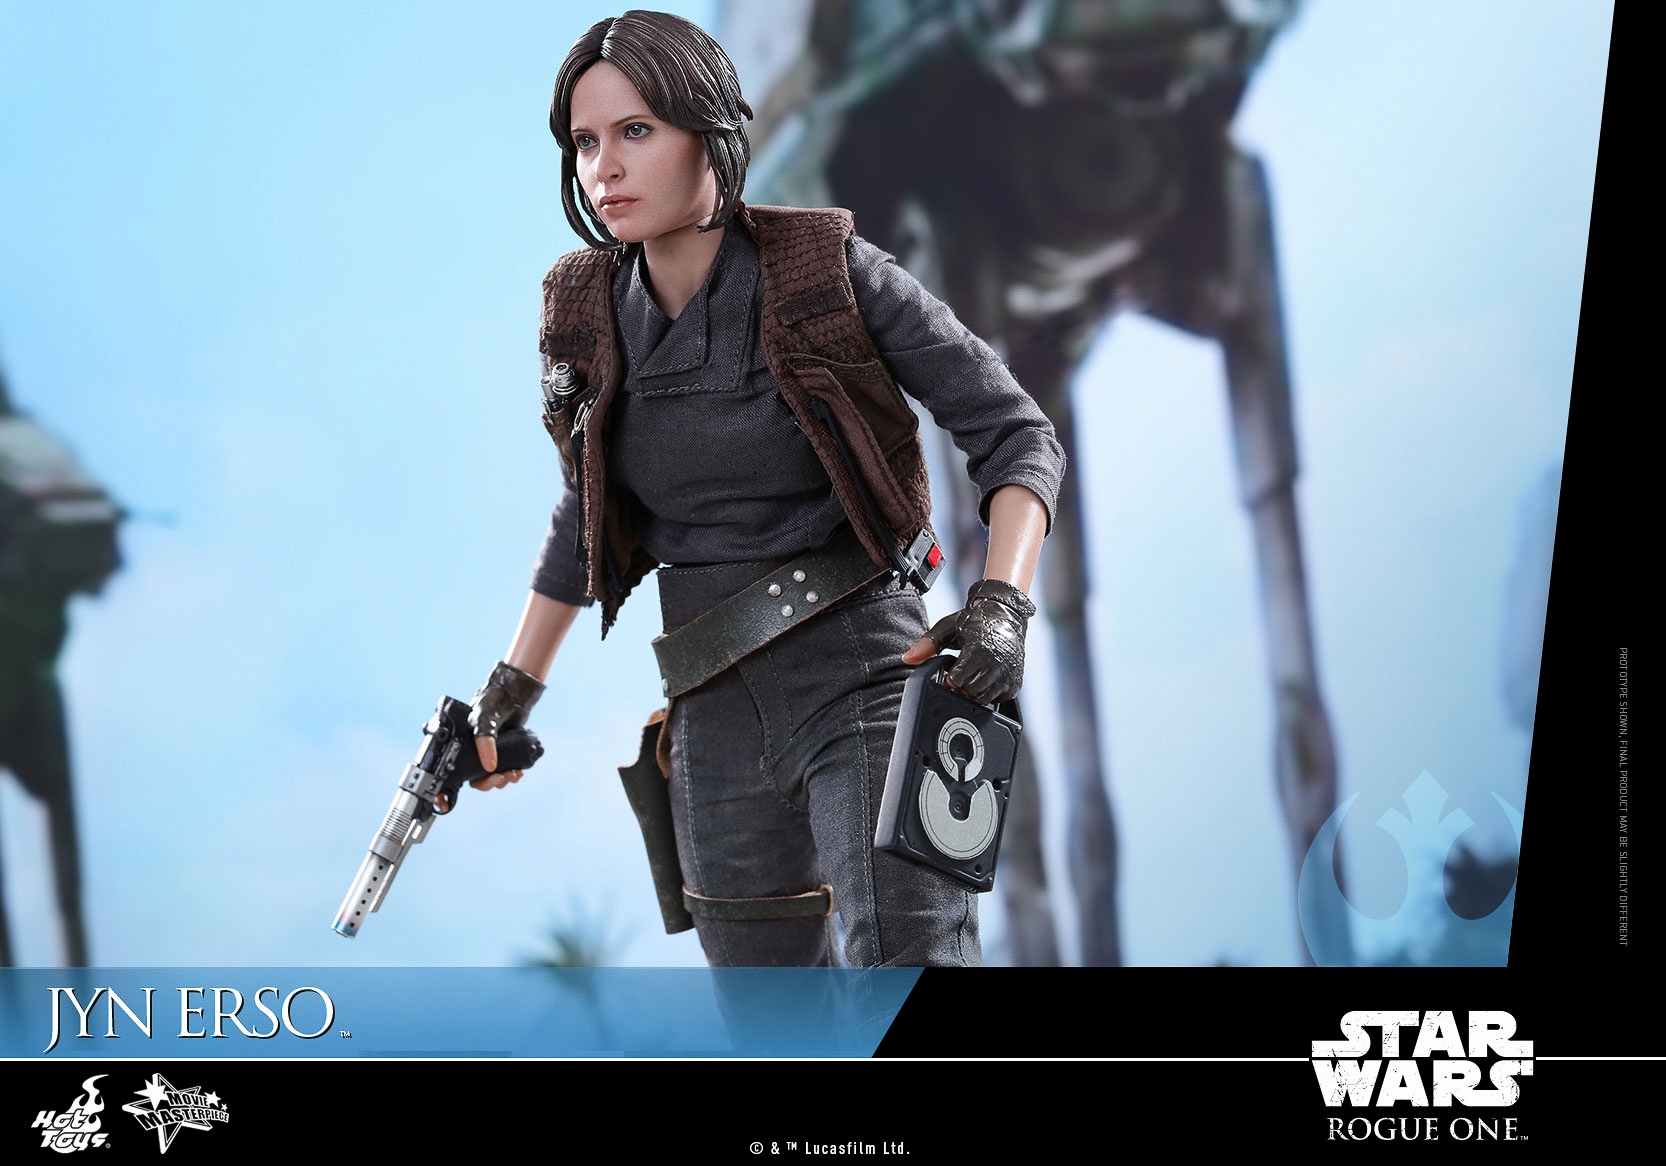 Hot-Toys-MMS404-Rogue-One-Jyn-Erso-Collectible-Figure-006.jpg